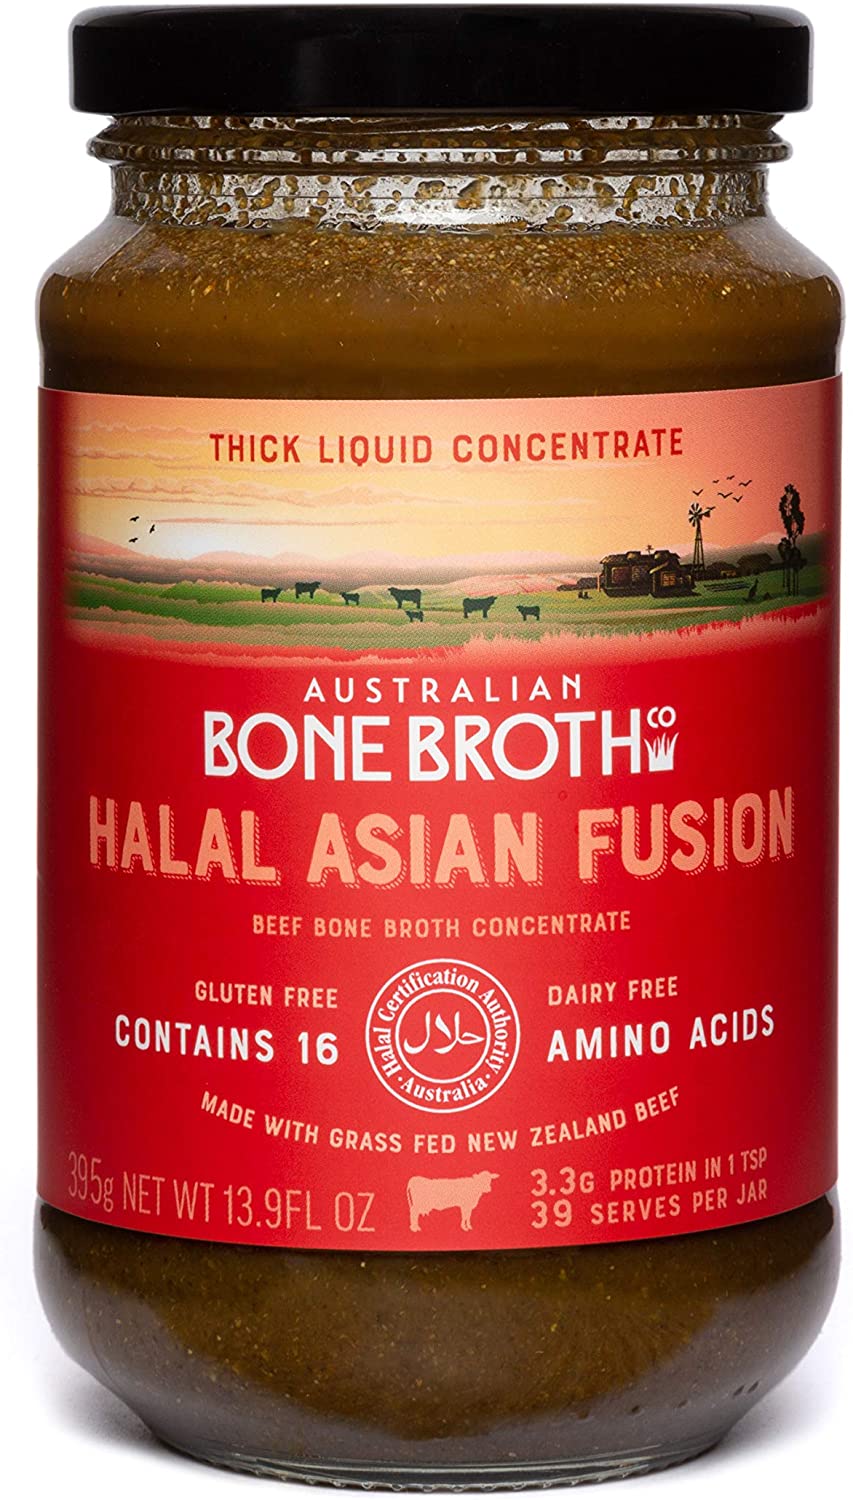 Halal Beef Bone Broth Concentrate- Certified Halal Asian Fusion – Great Protein Food Source - Instant Spicy Broth for Gut Health, Digestion and General Well-Being. 395 Grams Made in Australia 